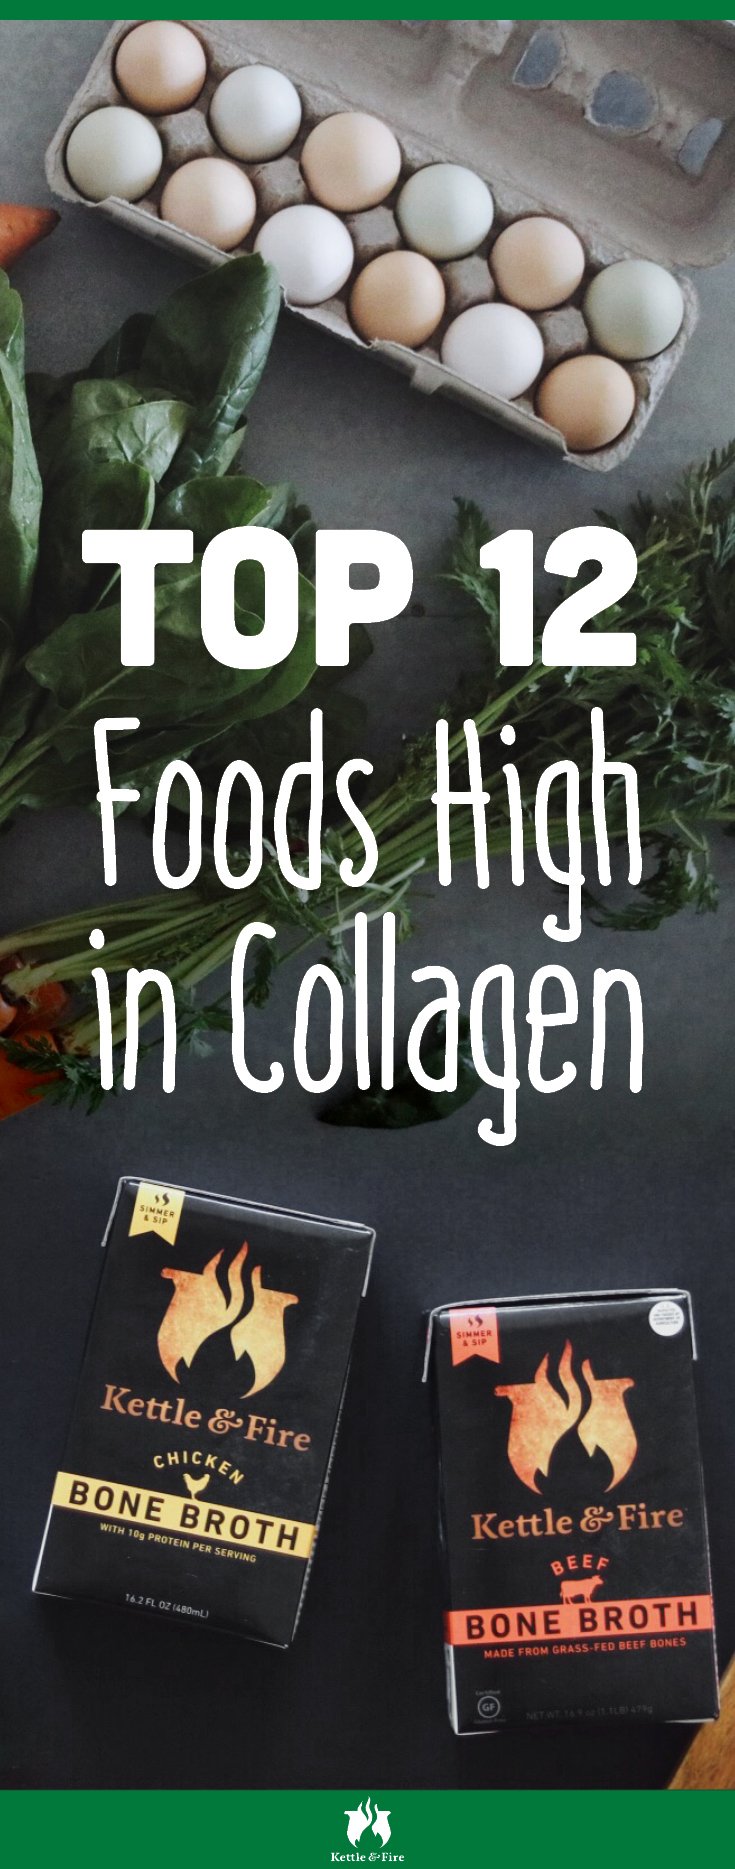 12 collagen foods to help slow down the aging process and keep your skin looking smooth. What are they? You might already have them in your kitchen.